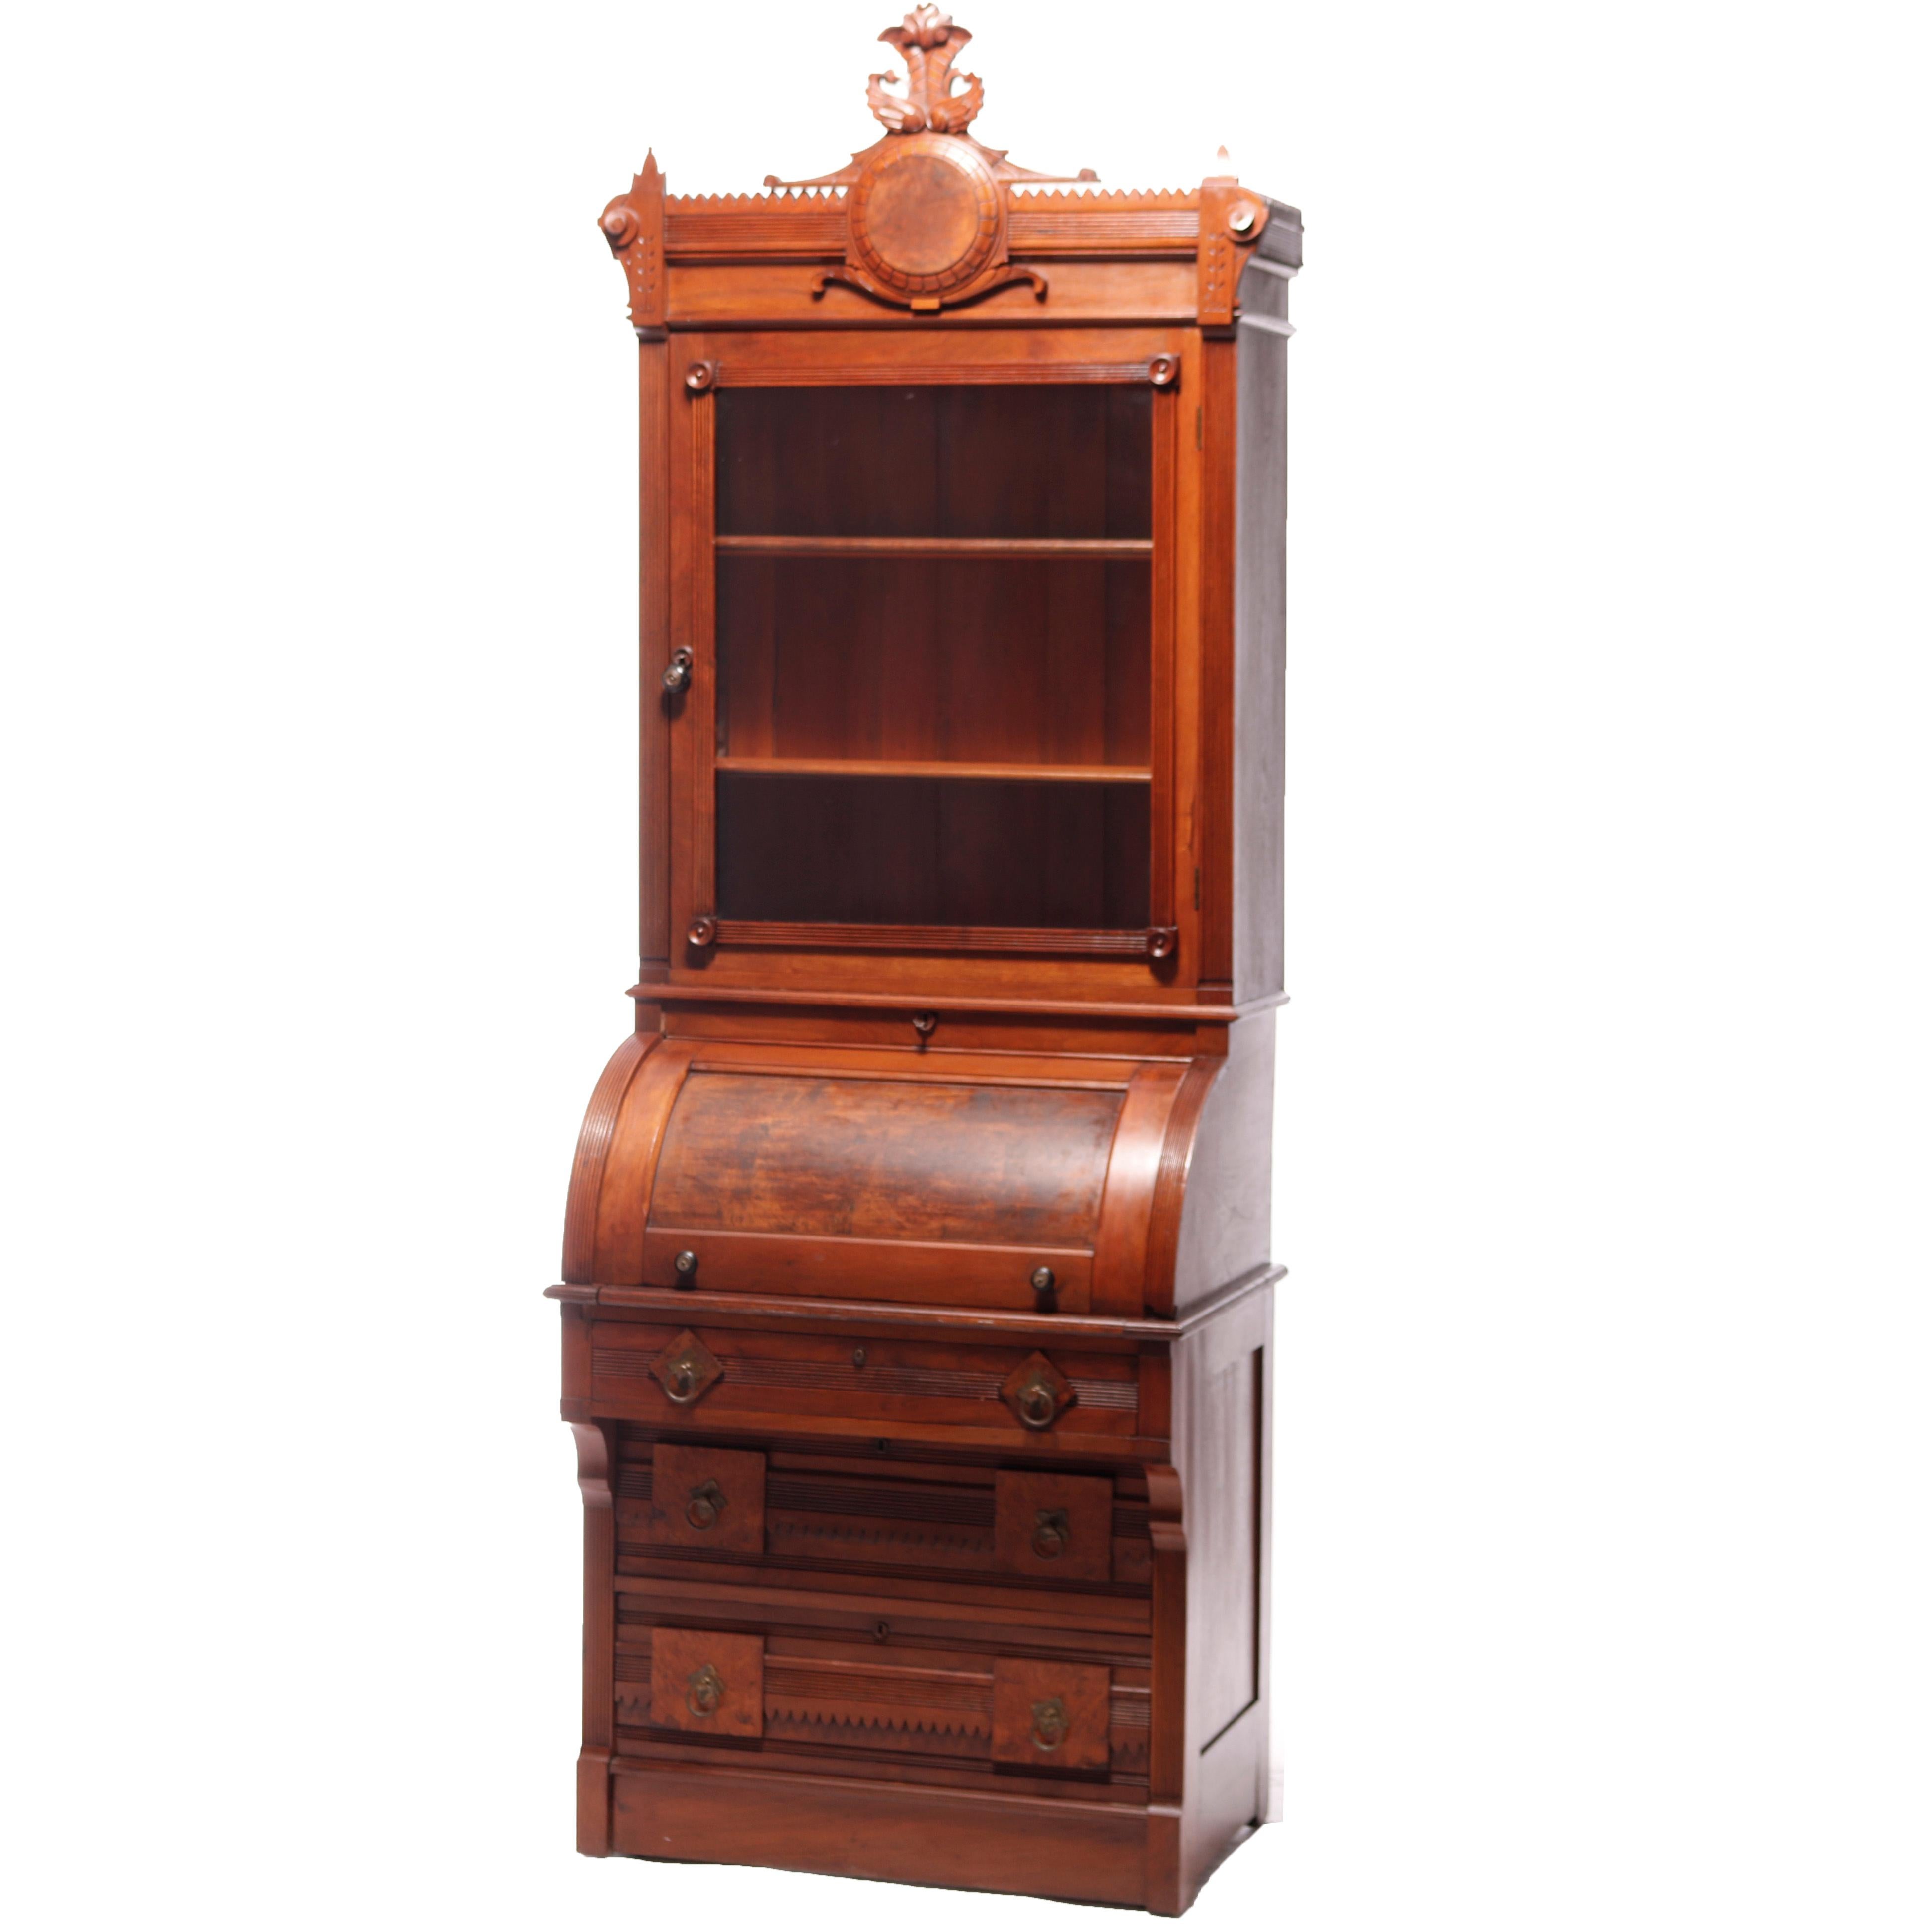 An antique Renaissance Revival diminutive cylinder desk offers walnut and burl construction with upper case having carved cartouche over double glass door bookcase surmounting lower case with cylinder top opening to pull out desk and storage